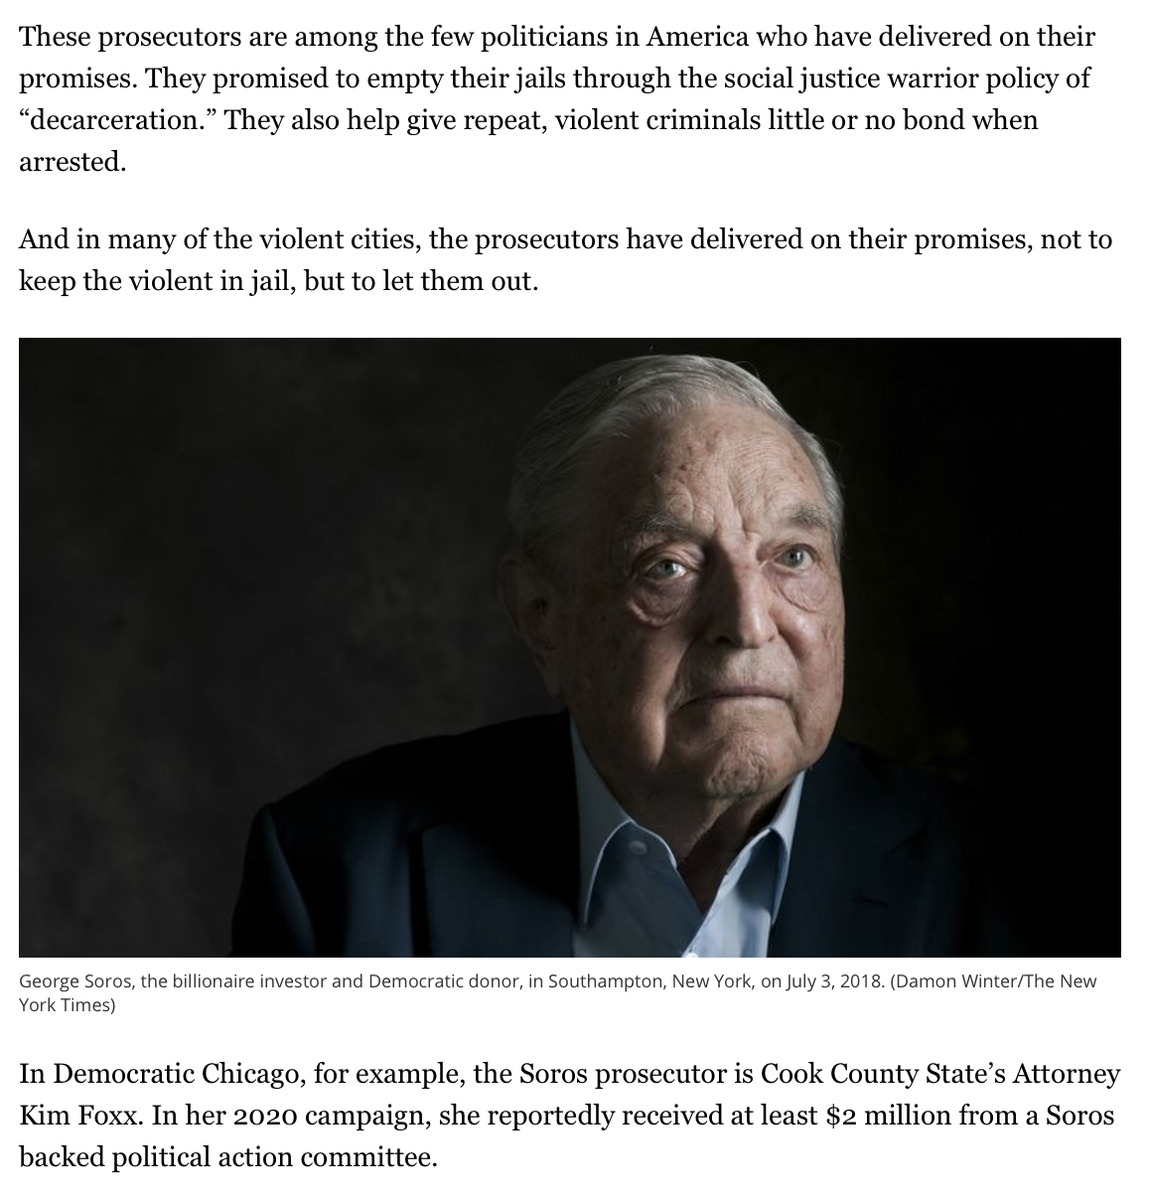 The piece mentioned Soros, a frequent target of right-wing anti-Jewish conspiracy theories, 8 times, and ran a photo of him. It used the word "social justice warrior" 4 times, and contained multiple references to "woke" and "wokeness." You get the idea.